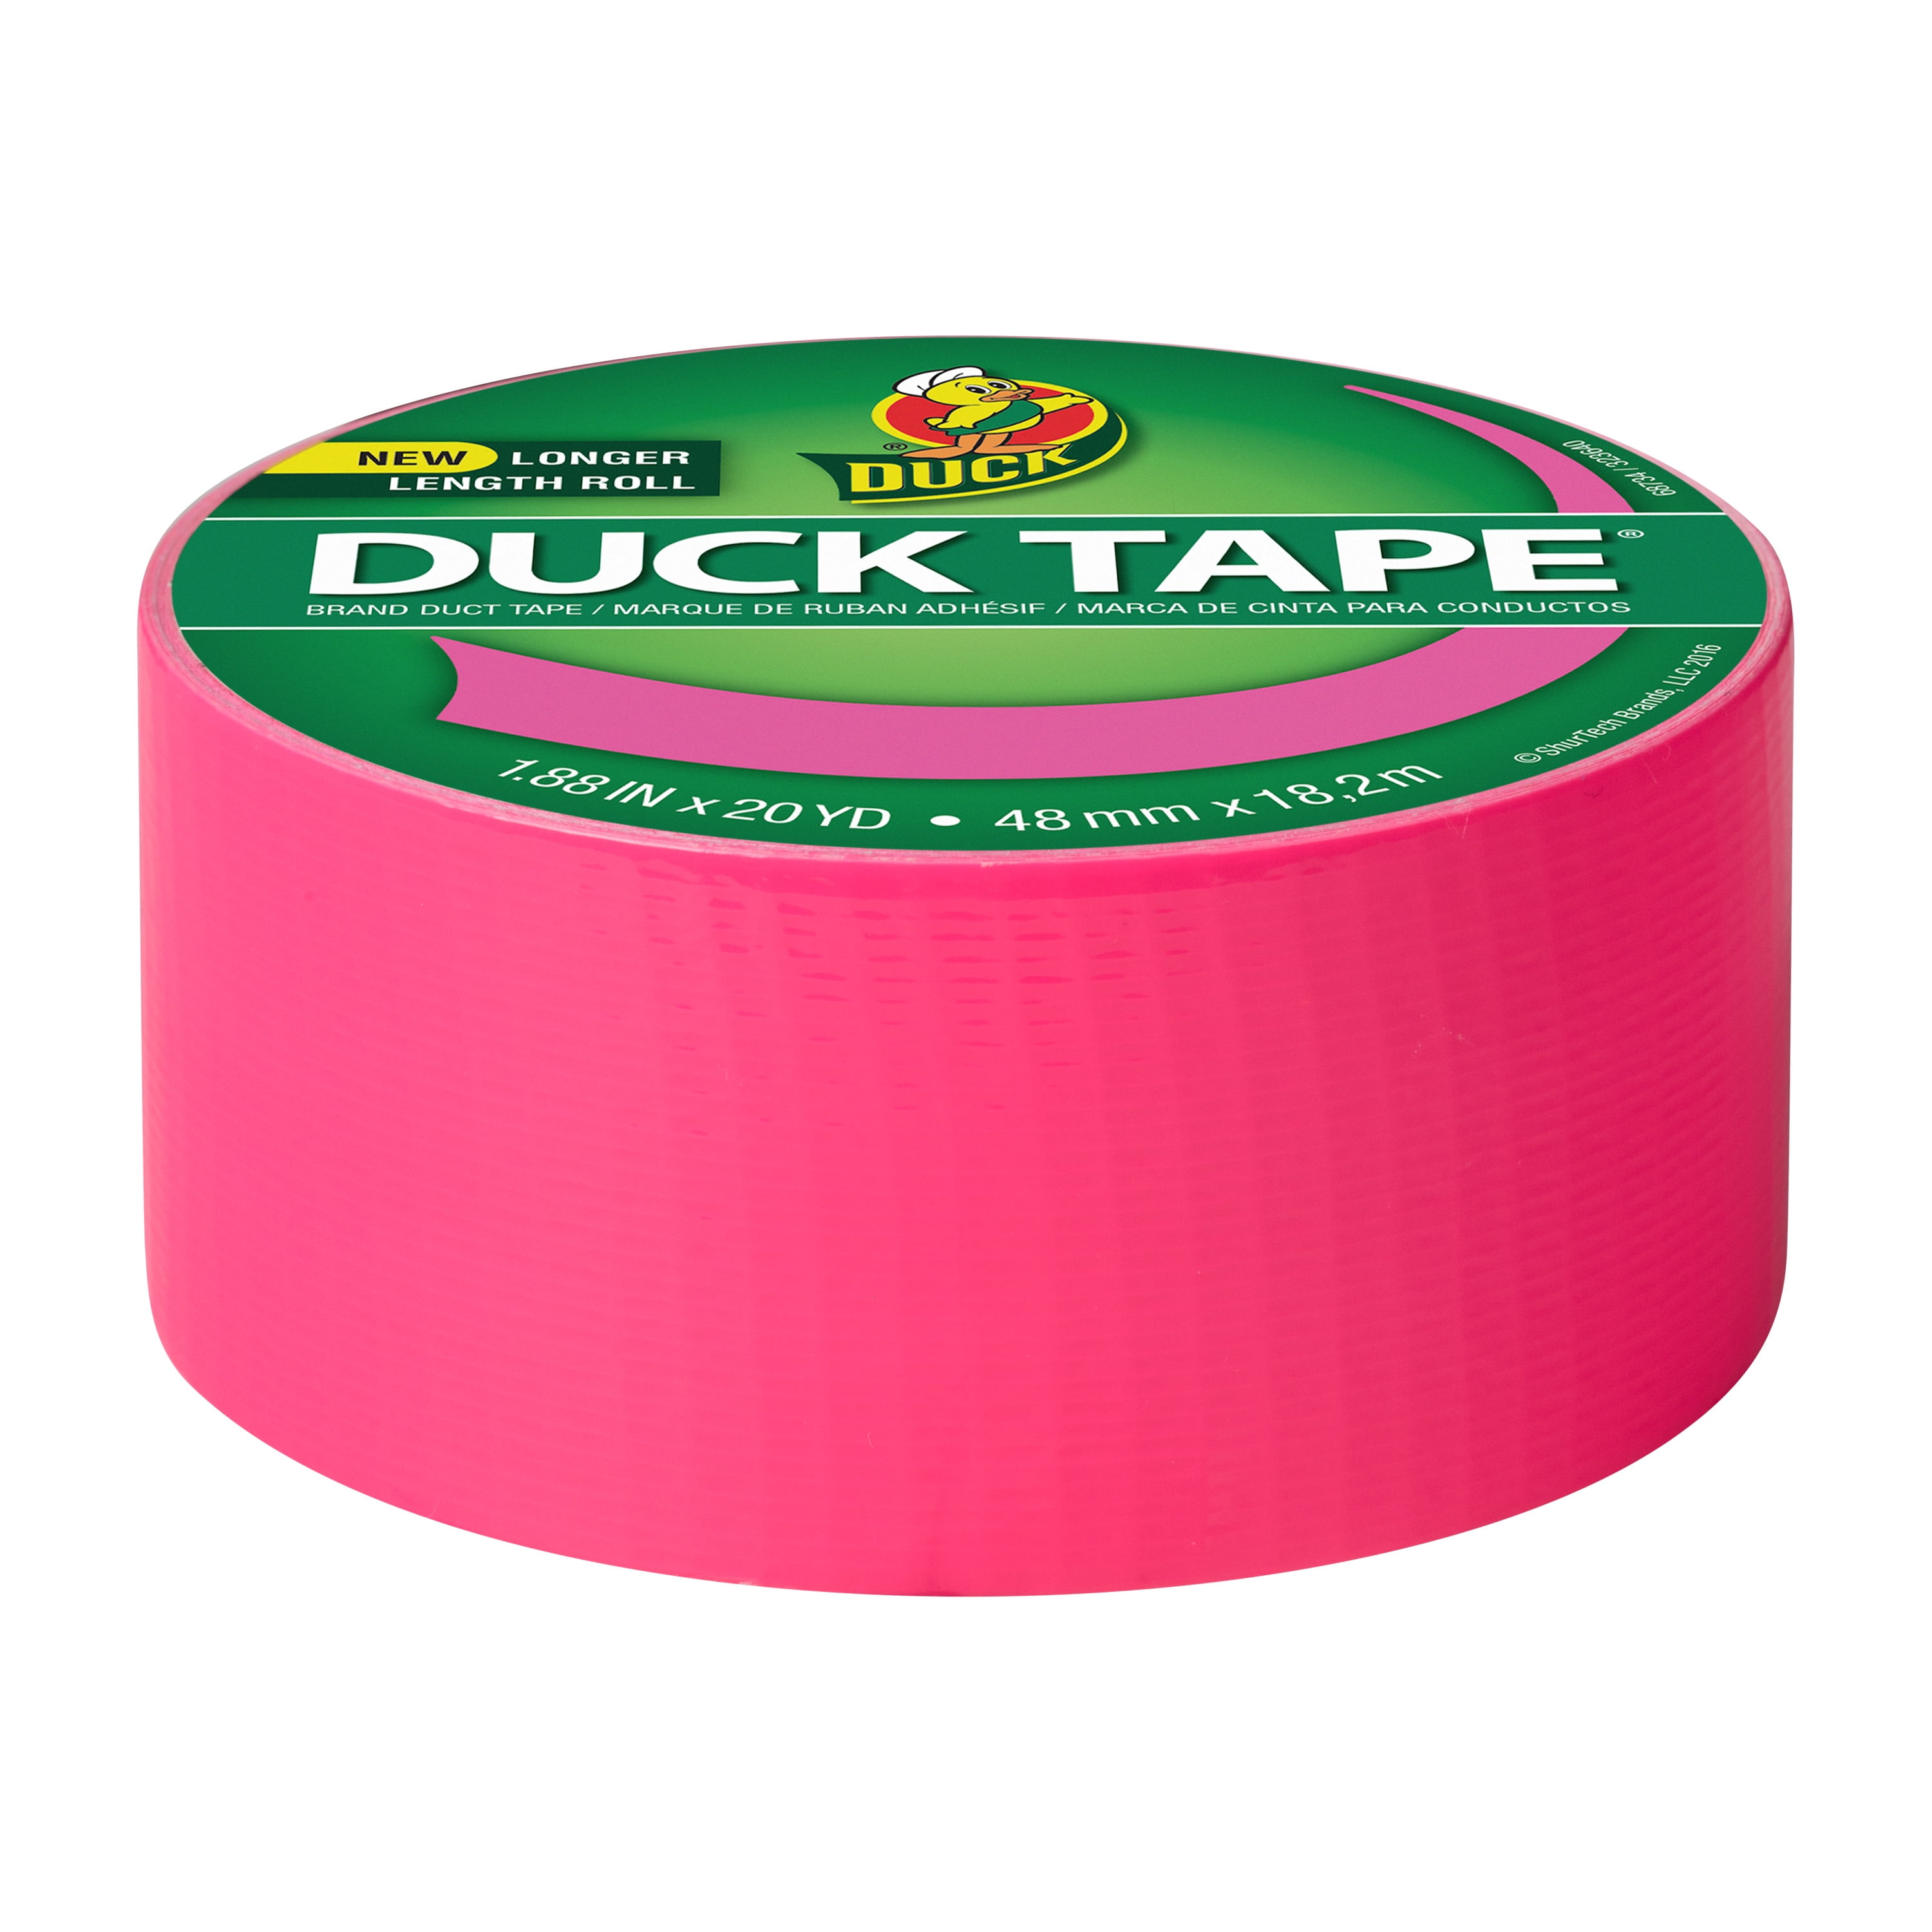 48 Wholesale Decorative Duct Tape - Neon Purple And Neon PinK- 1.89 X 10'  - Closeout - at 